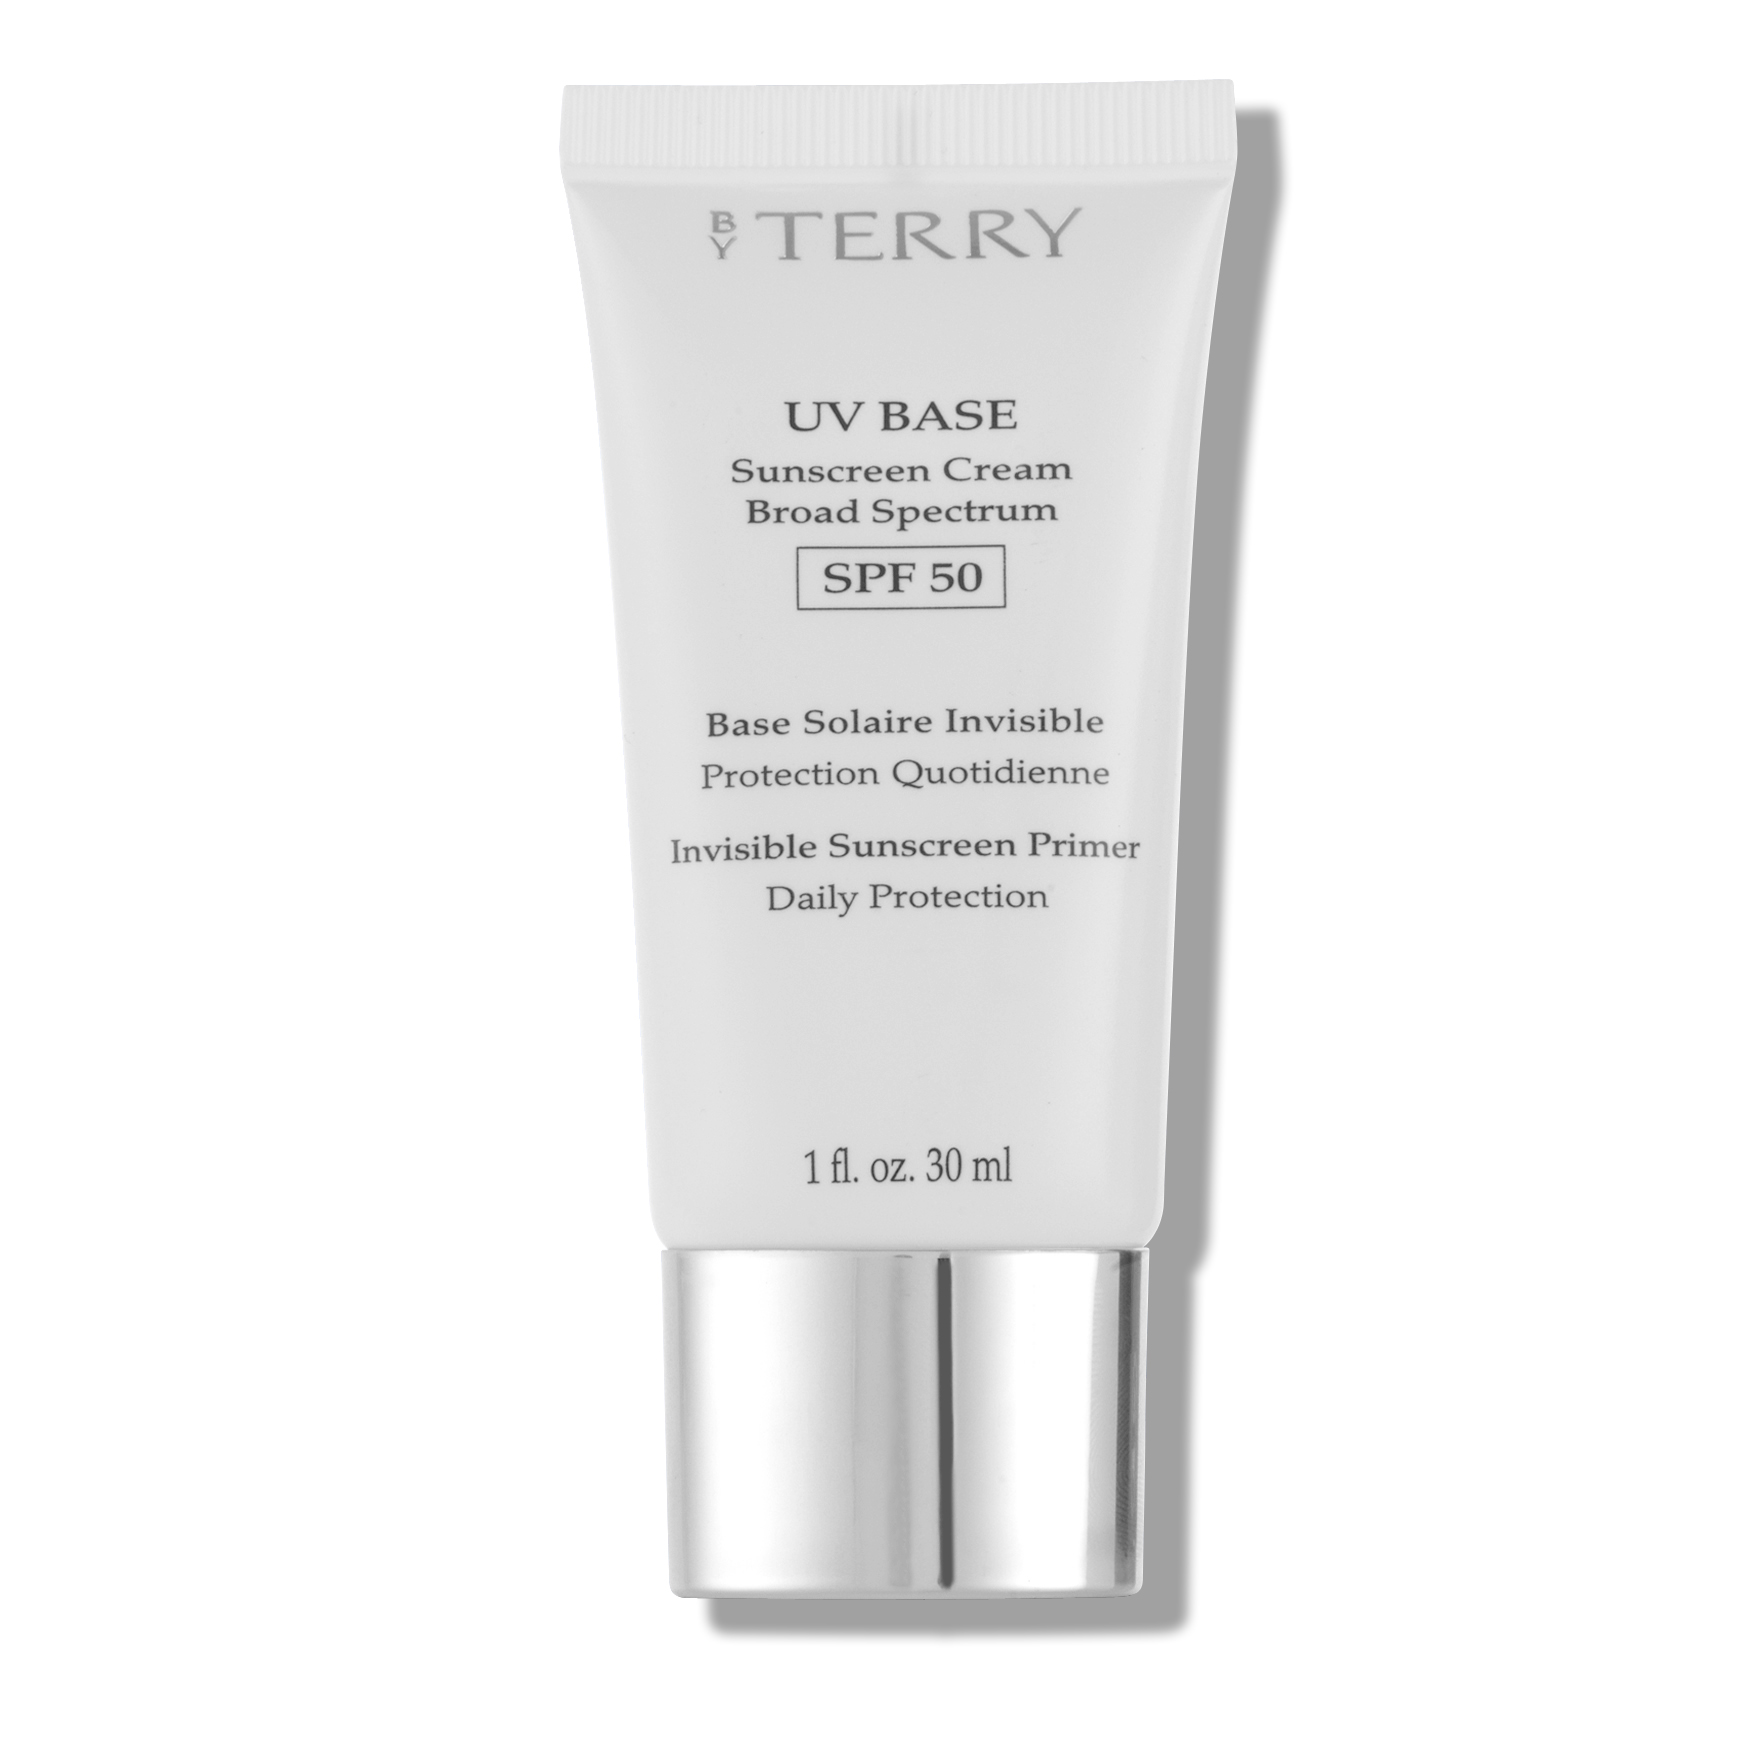 By Terry UV Base Sunscreen Cream Broad Spectrum SPF50 | Space NK